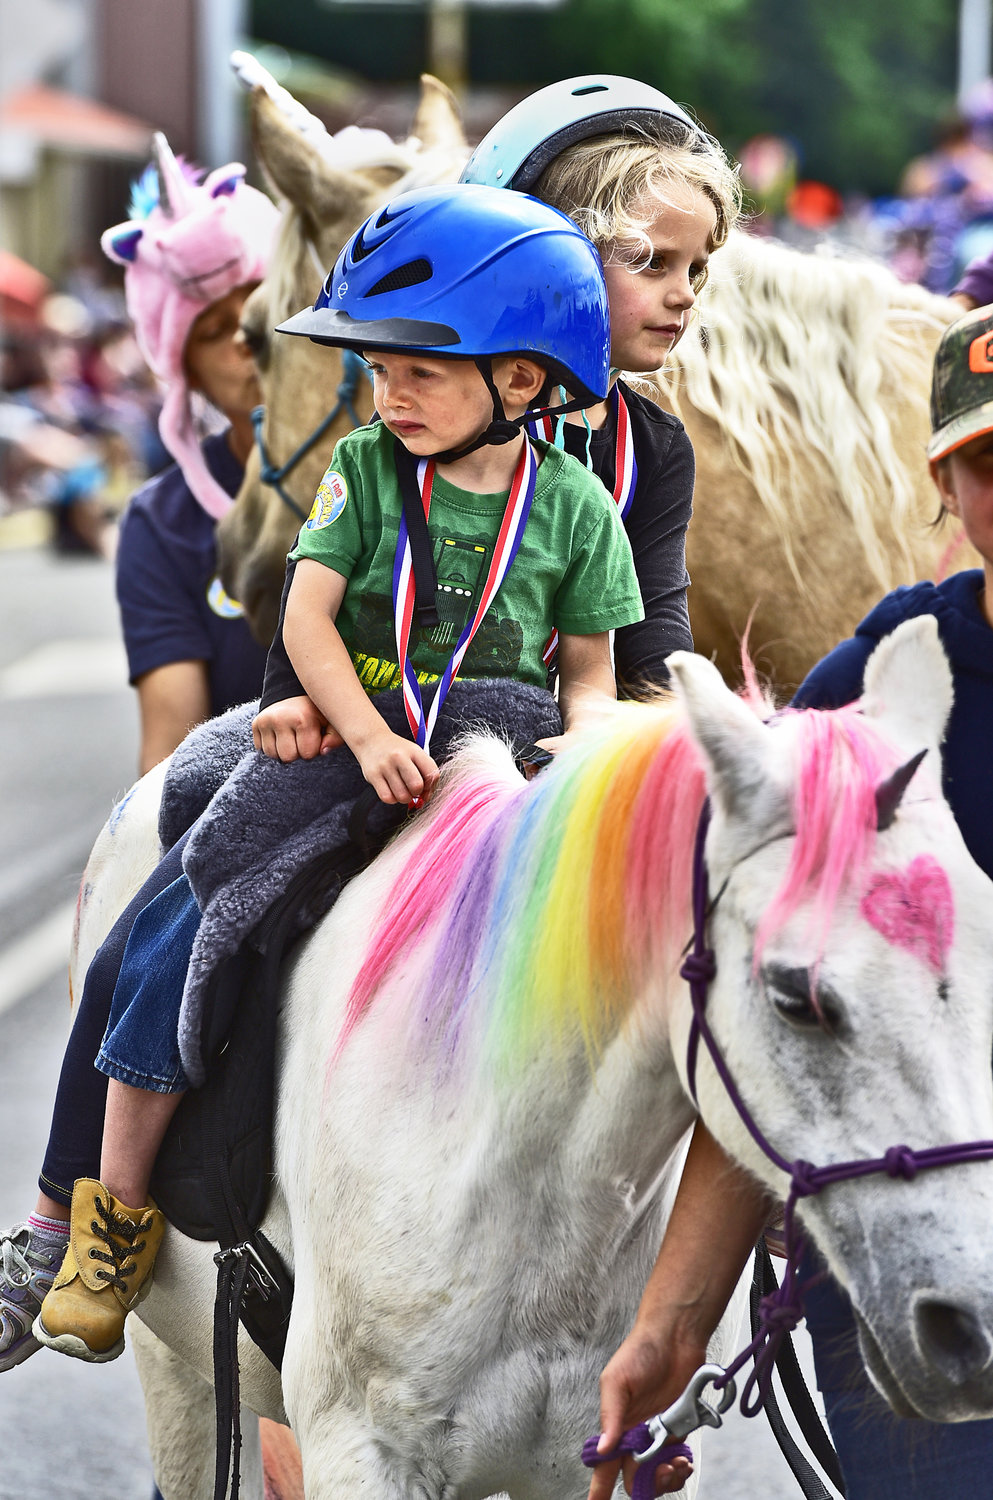 A couple of cute kids ride a “unicorn horse” during Oakville’s Independence Day parade on Saturday, July 3.